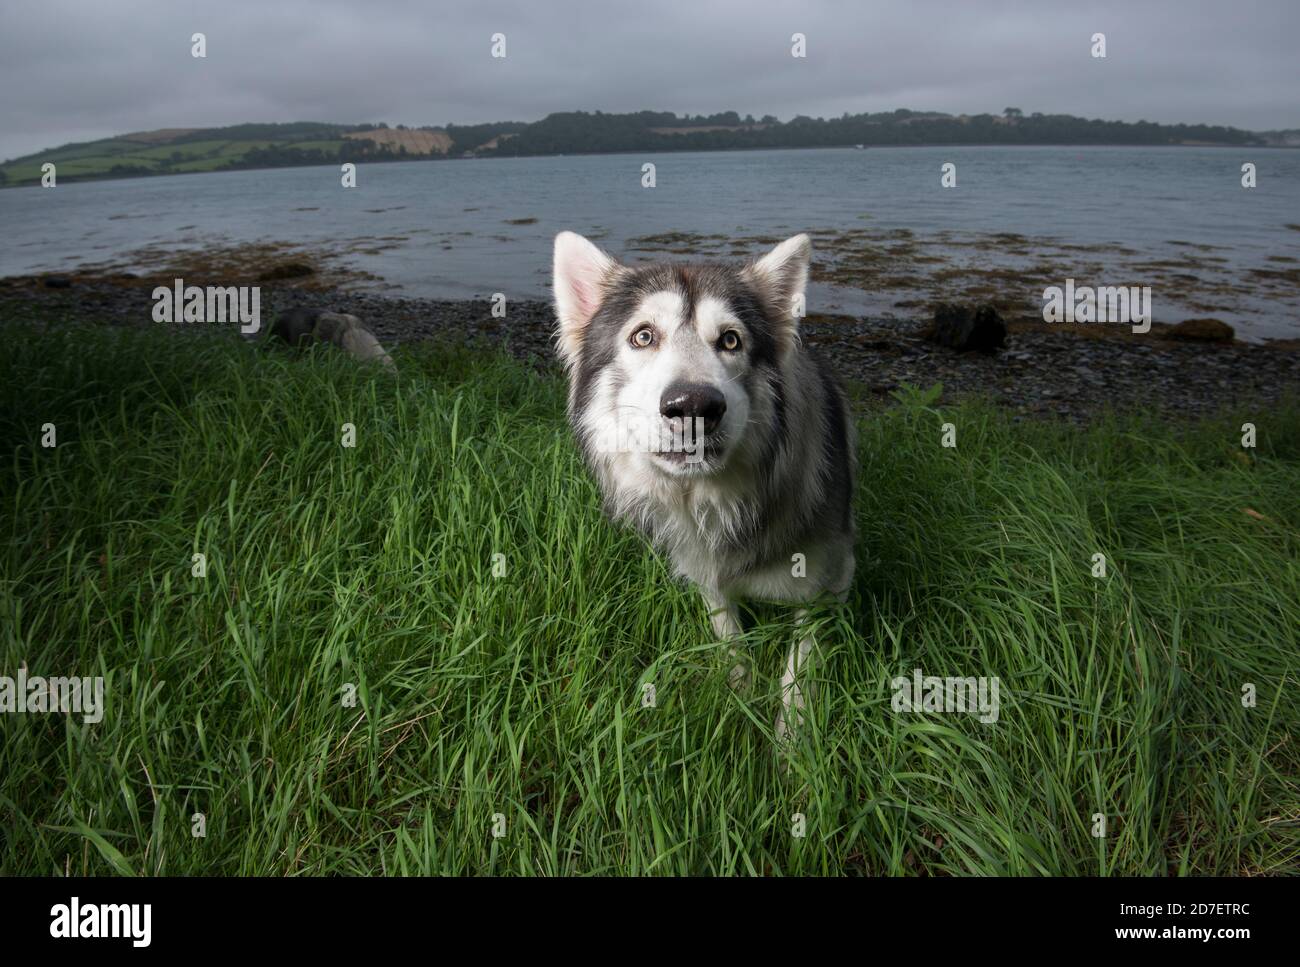 Portrait of a Northern Inuit dog photographed near Strangford Lough in County Down, Northern Ireland. Stock Photo